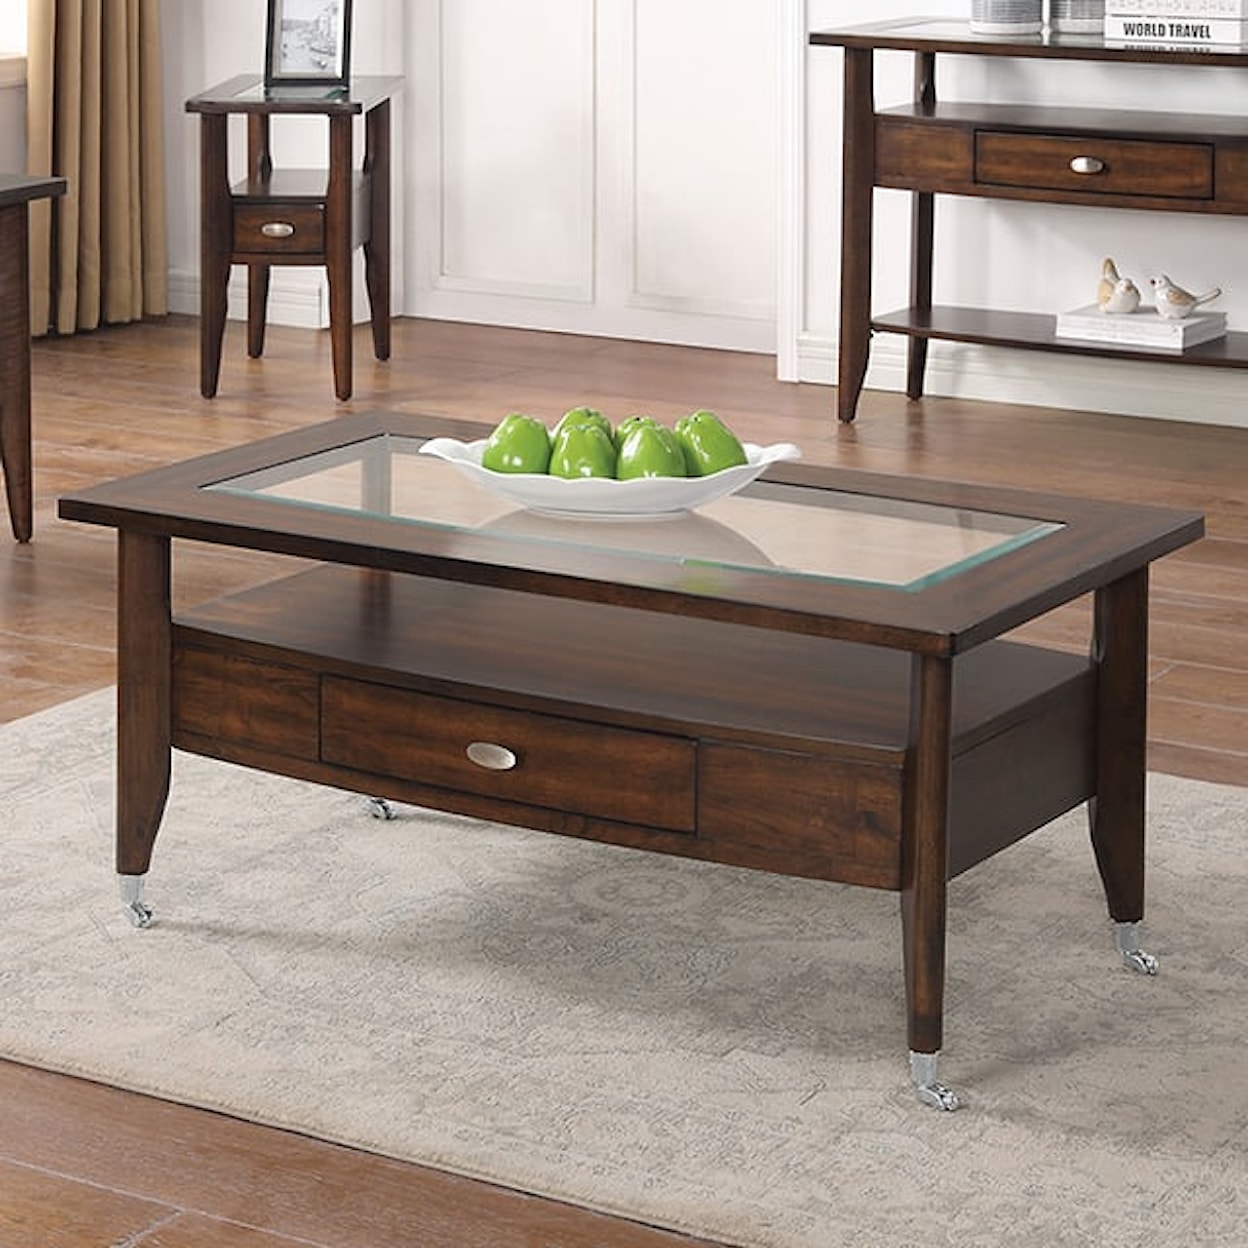 Furniture of America Riverdale  Dark Walnut Coffee Table with Glass Top